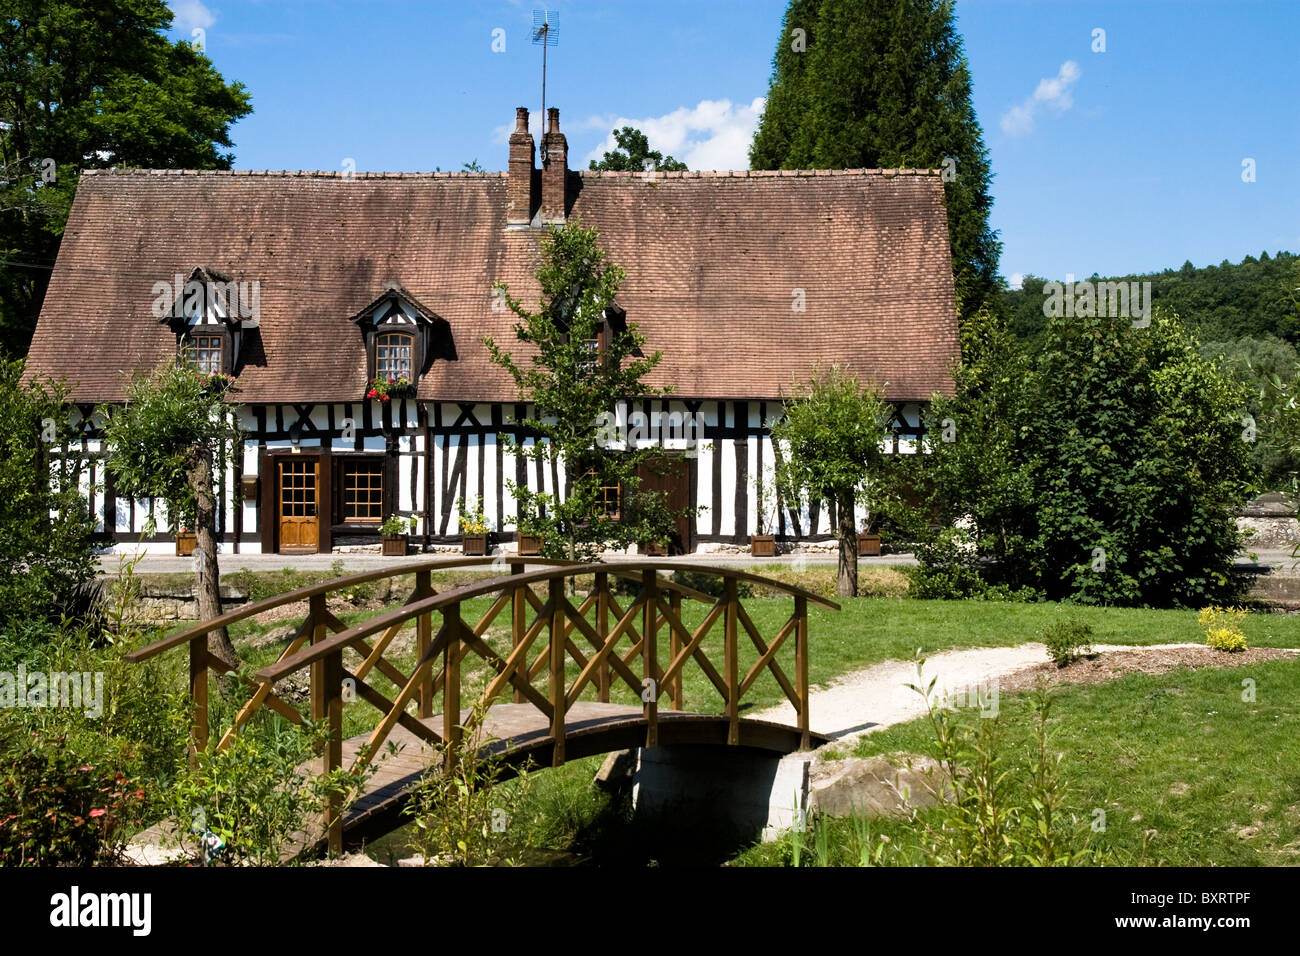 France, Normandie, Lyons la Foret, View of house with footbridge Stock Photo